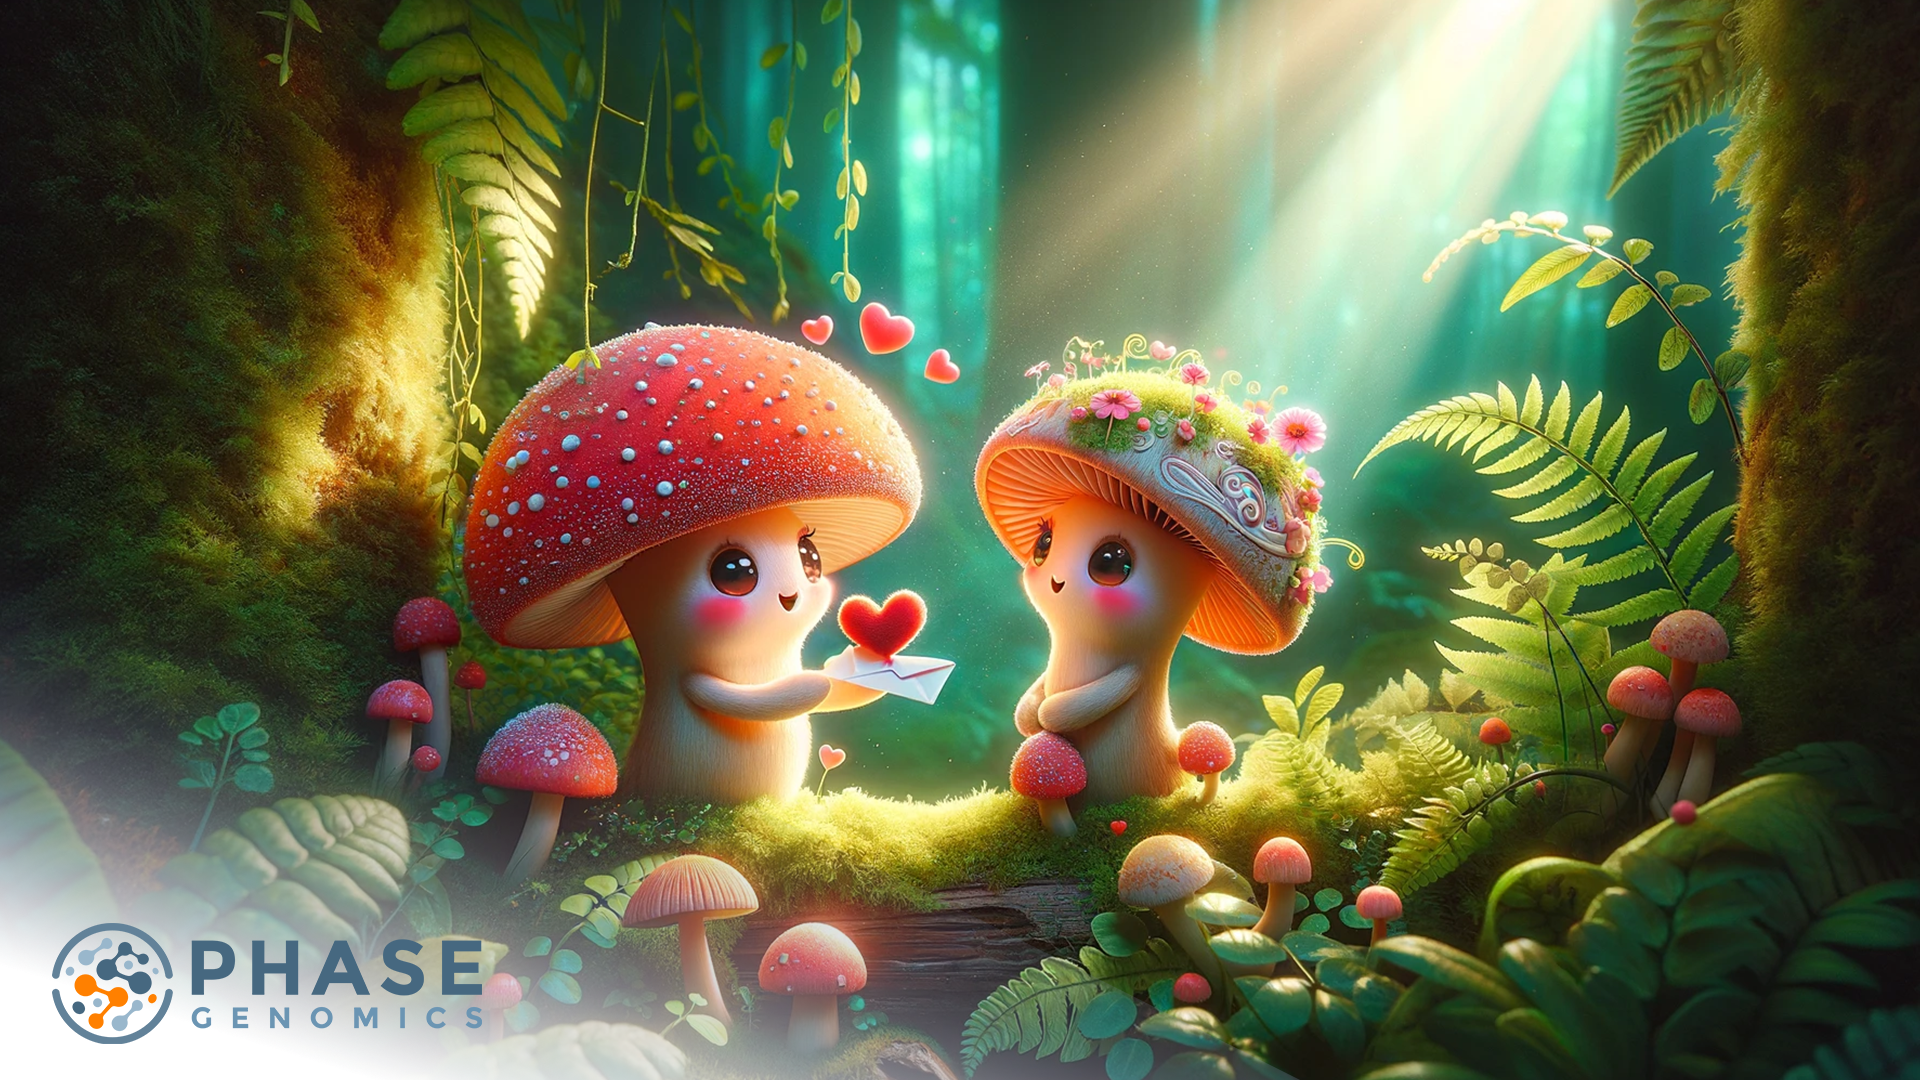 two fungi exchange love letters in a whimsical forest scene